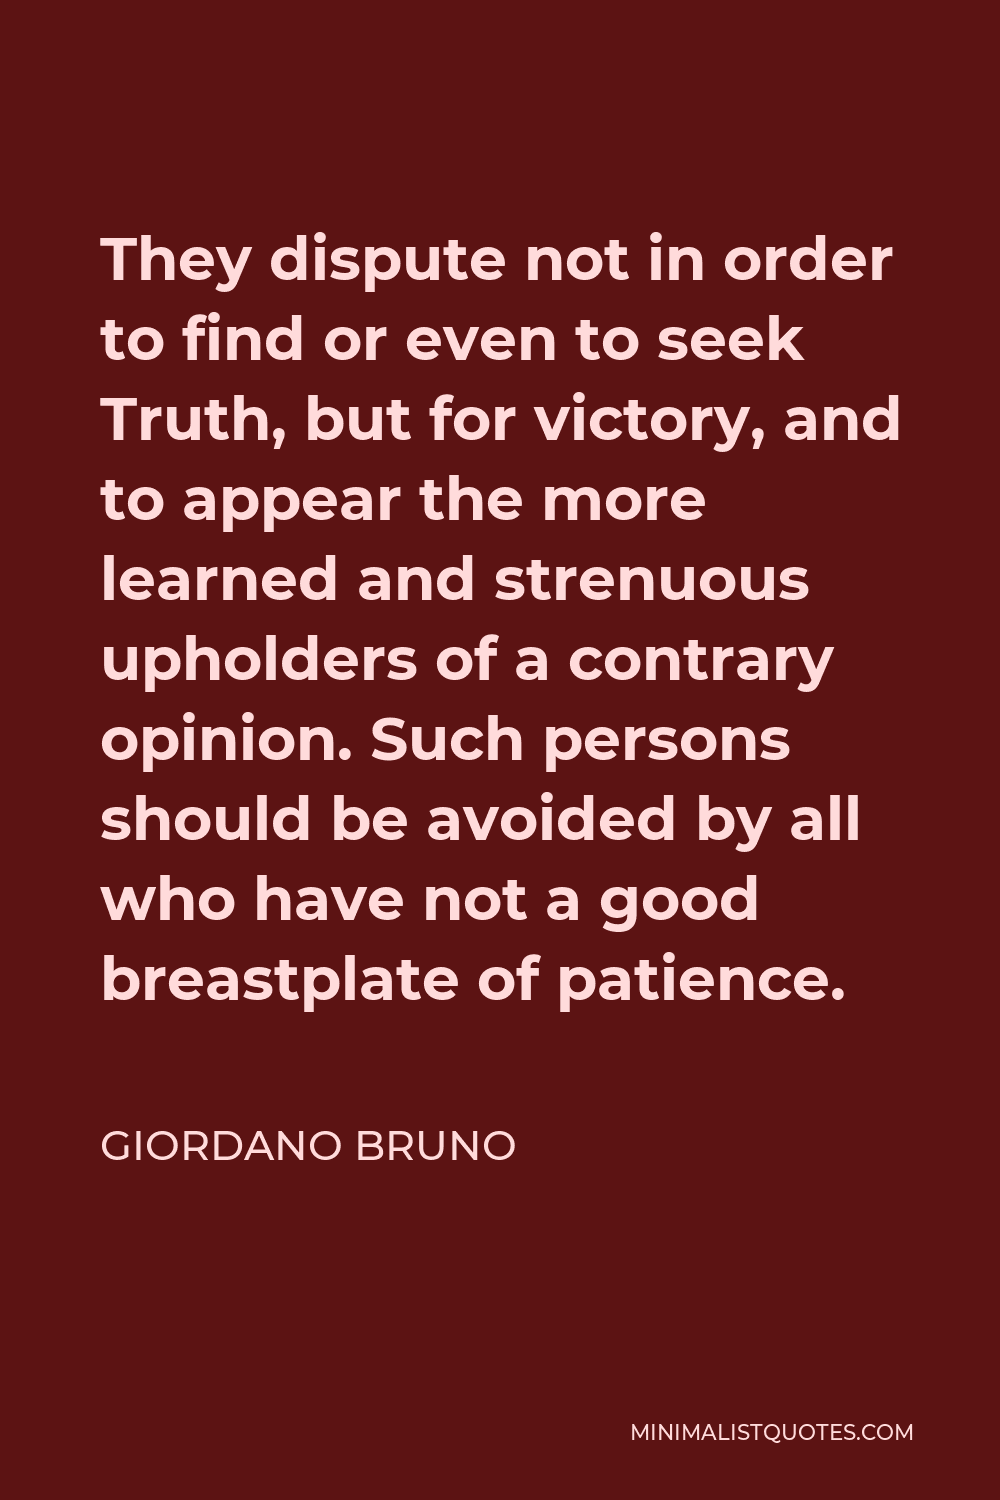 Giordano Bruno Quote - They dispute not in order to find or even to seek Truth, but for victory, and to appear the more learned and strenuous upholders of a contrary opinion. Such persons should be avoided by all who have not a good breastplate of patience.